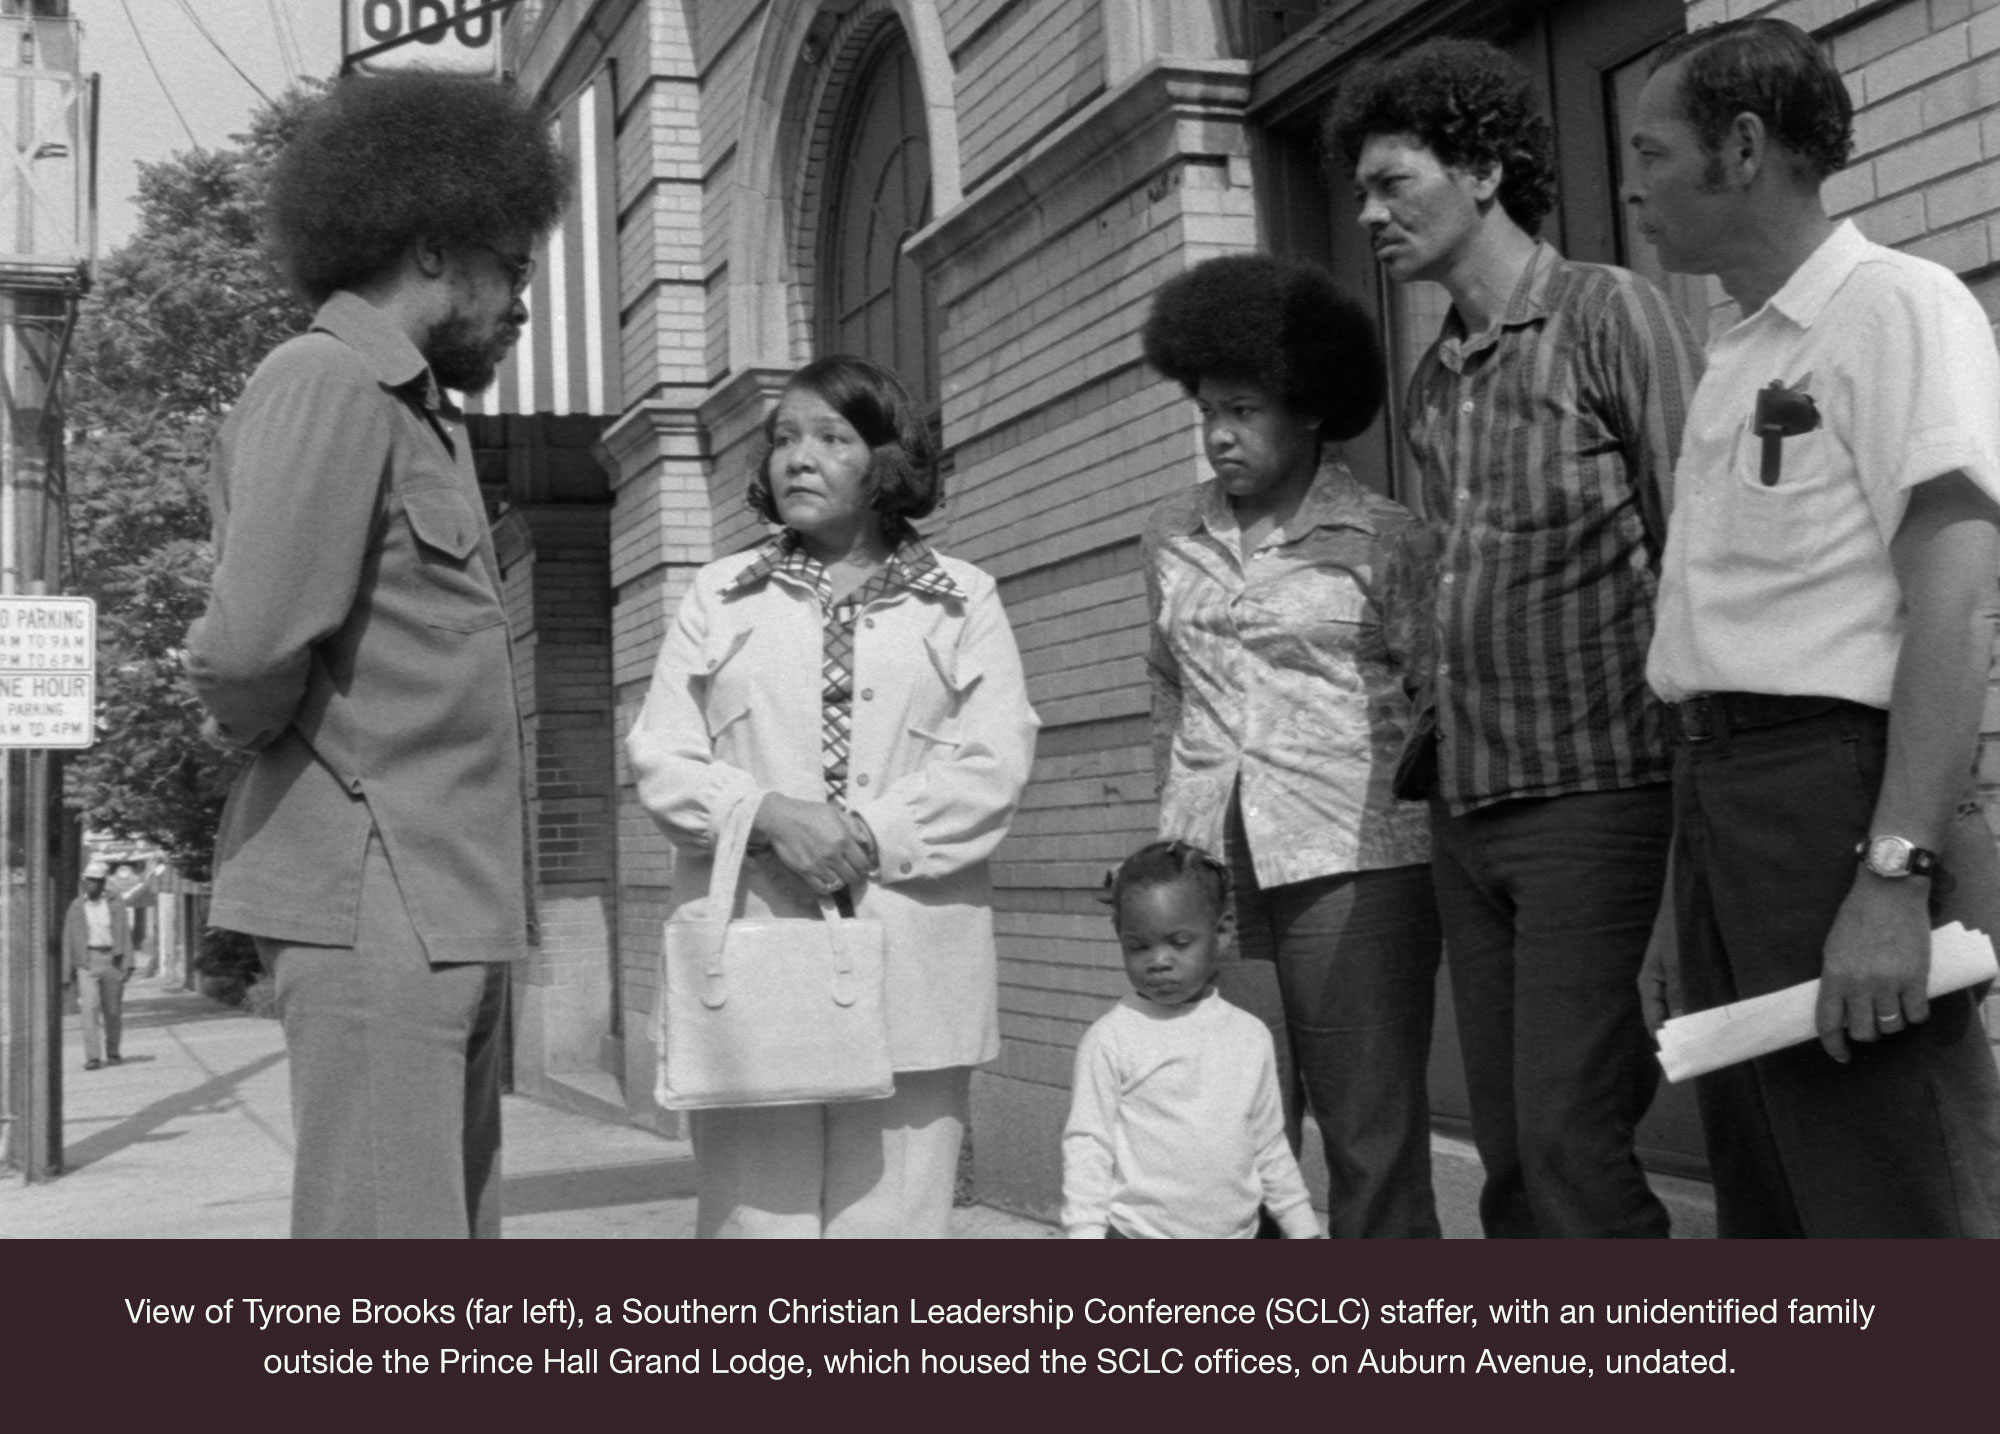 View of Tyrone Brooks (far left), a Southern Christian Leadership Conference (SCLC) staffer, with an unidentified family outside the Prince Hall Grand Lodge, which housed the SCLC offices, on Auburn Avenue, undated.